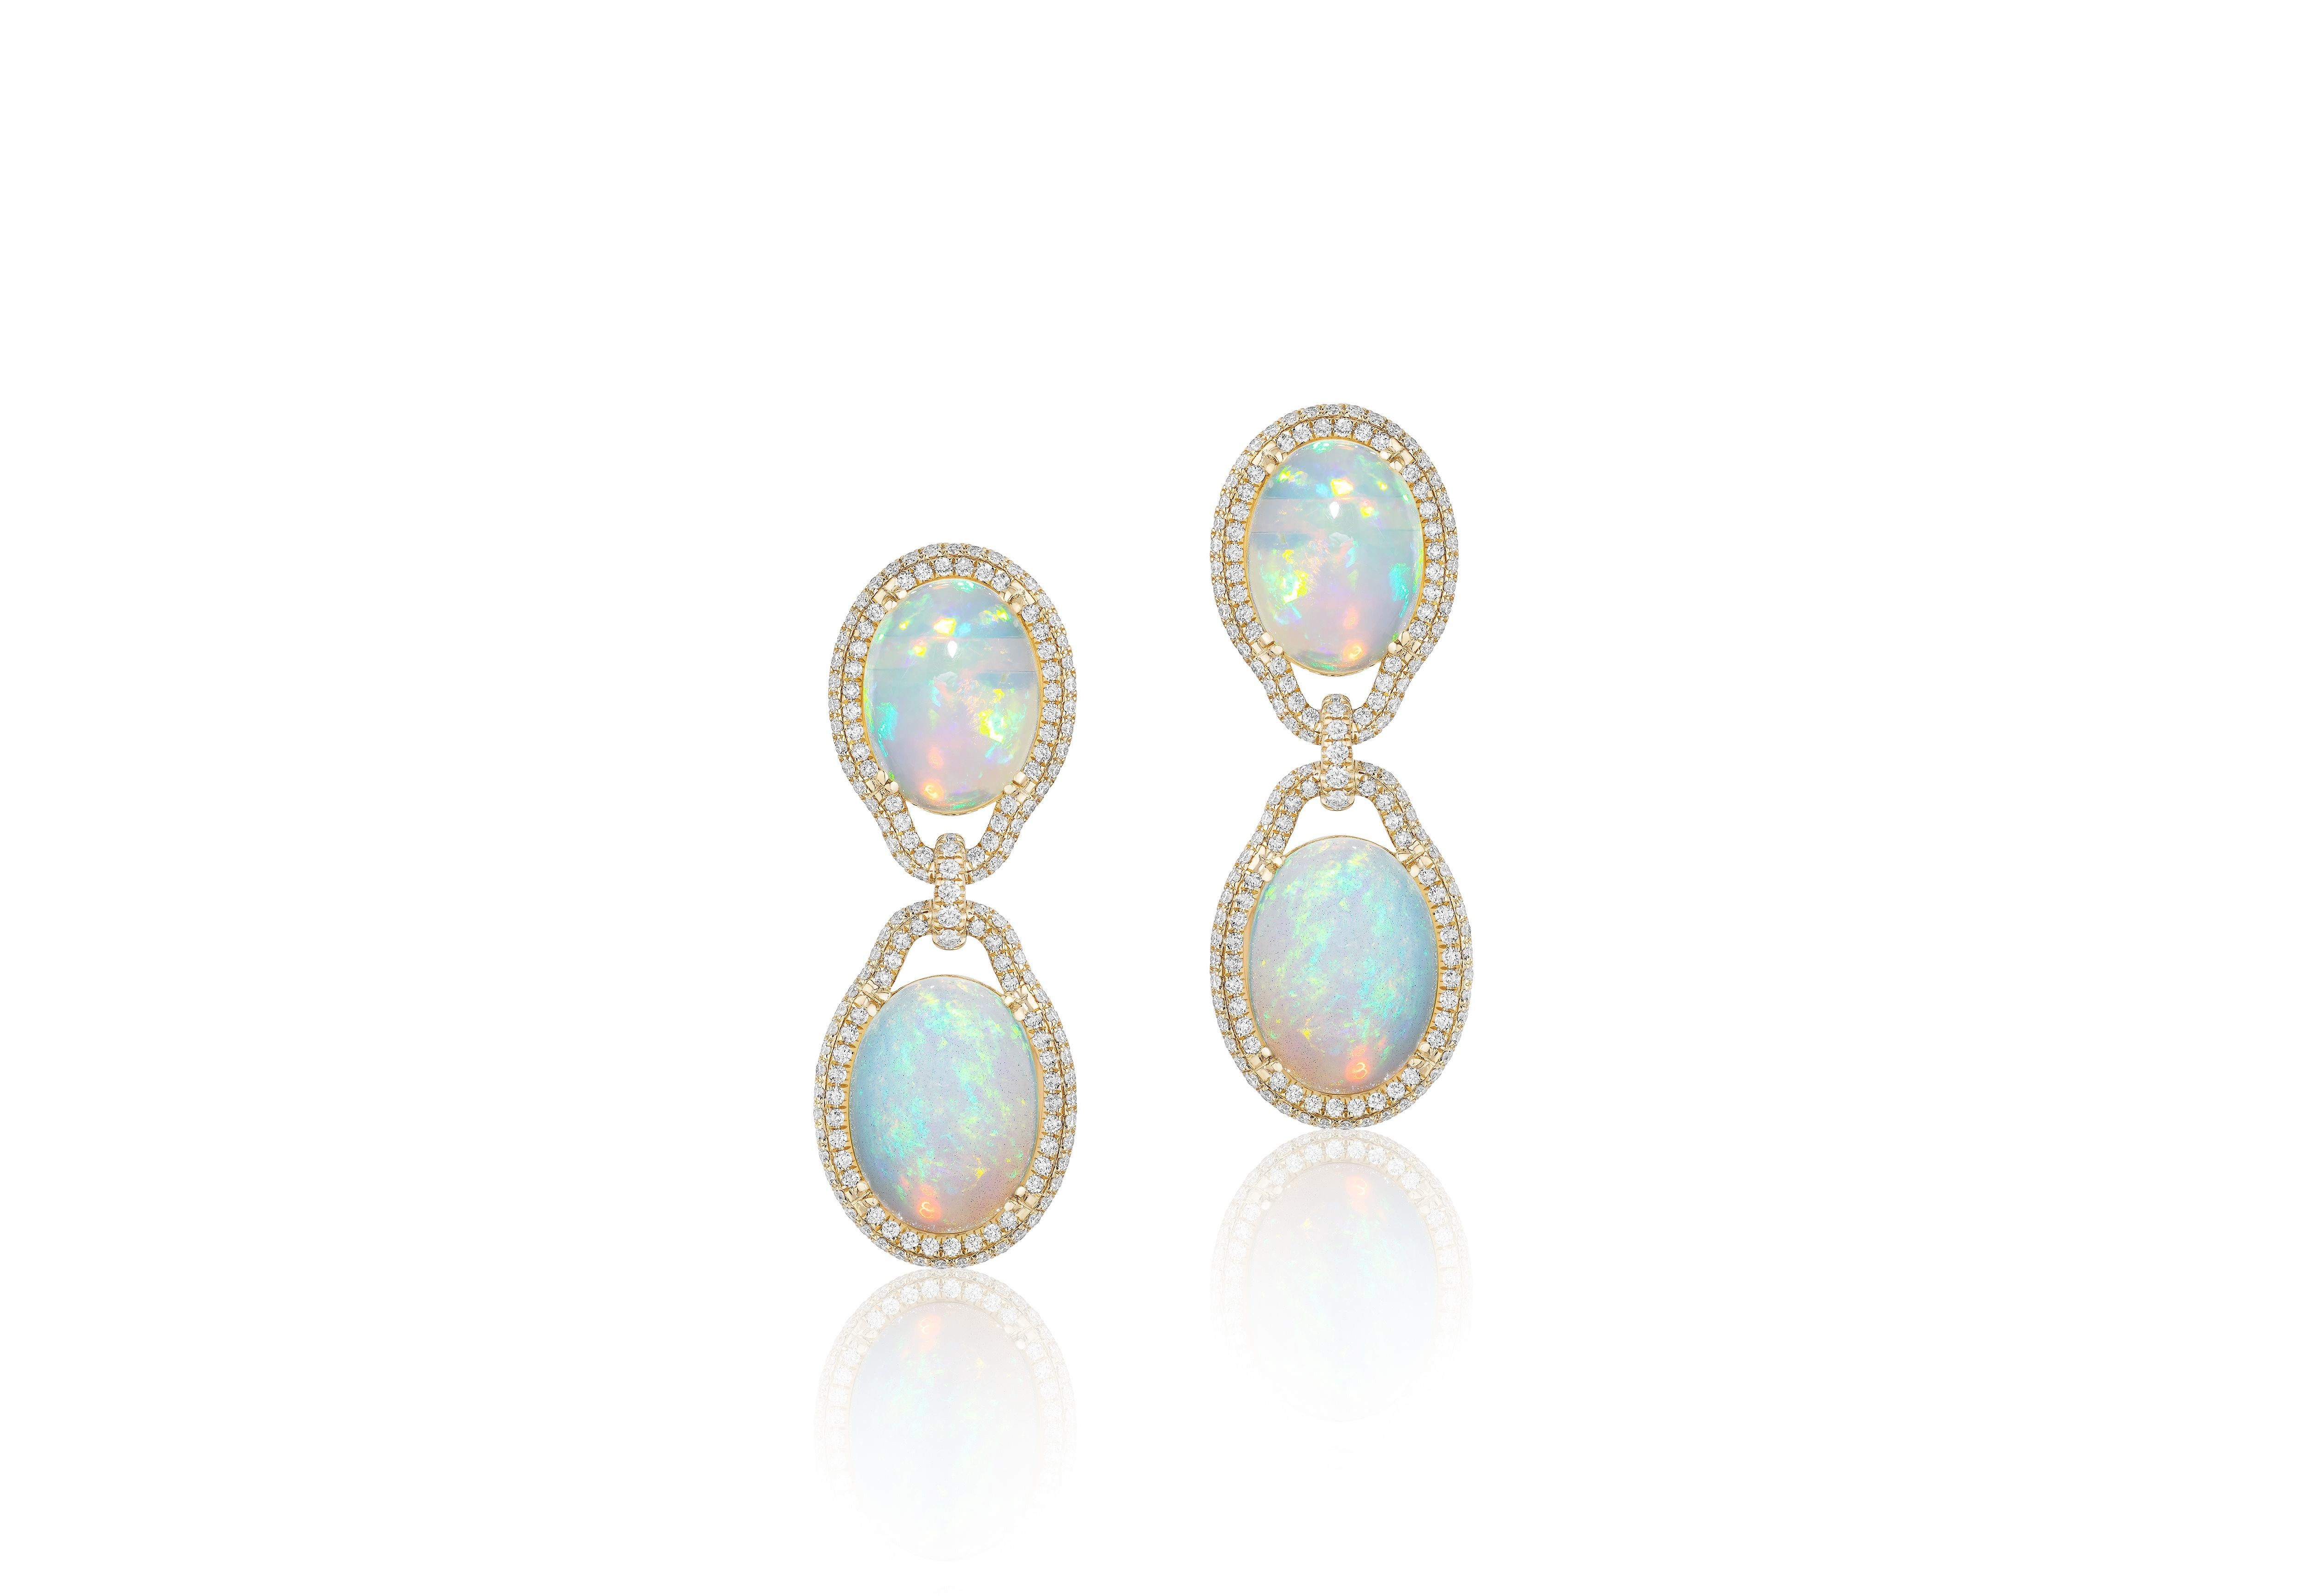 Oval Opal Cabochon Earring With Diamonds in 18K Yellow Gold, from 'G-One' Collection

Approx. Wt: 26.09 Carats (Opal)

Diamonds: G-H / VS, Approx Wt: 2.79 Carats

Stone Size: 12 x 16 mm, 13 x 18 mm 

